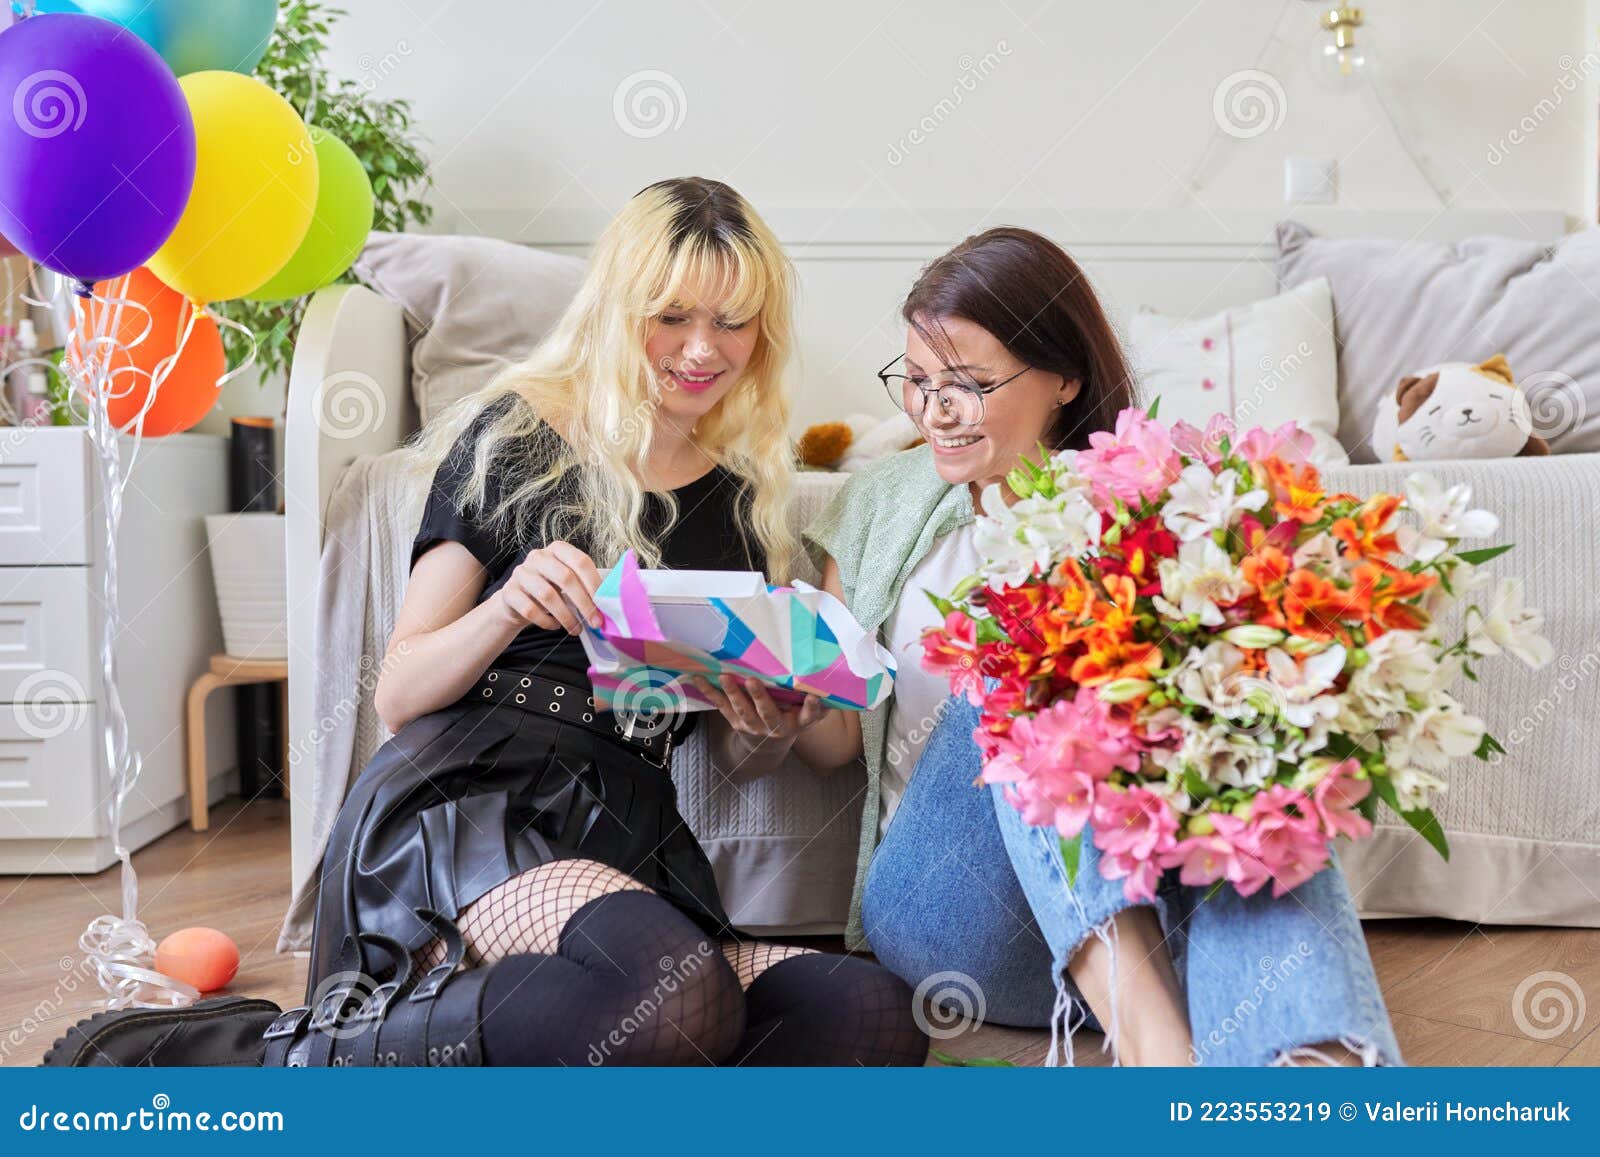 Father Surprise His Daughter with Birthday Party at Home and Birthday Gift  Stock Image - Image of leisure, girl: 183778575